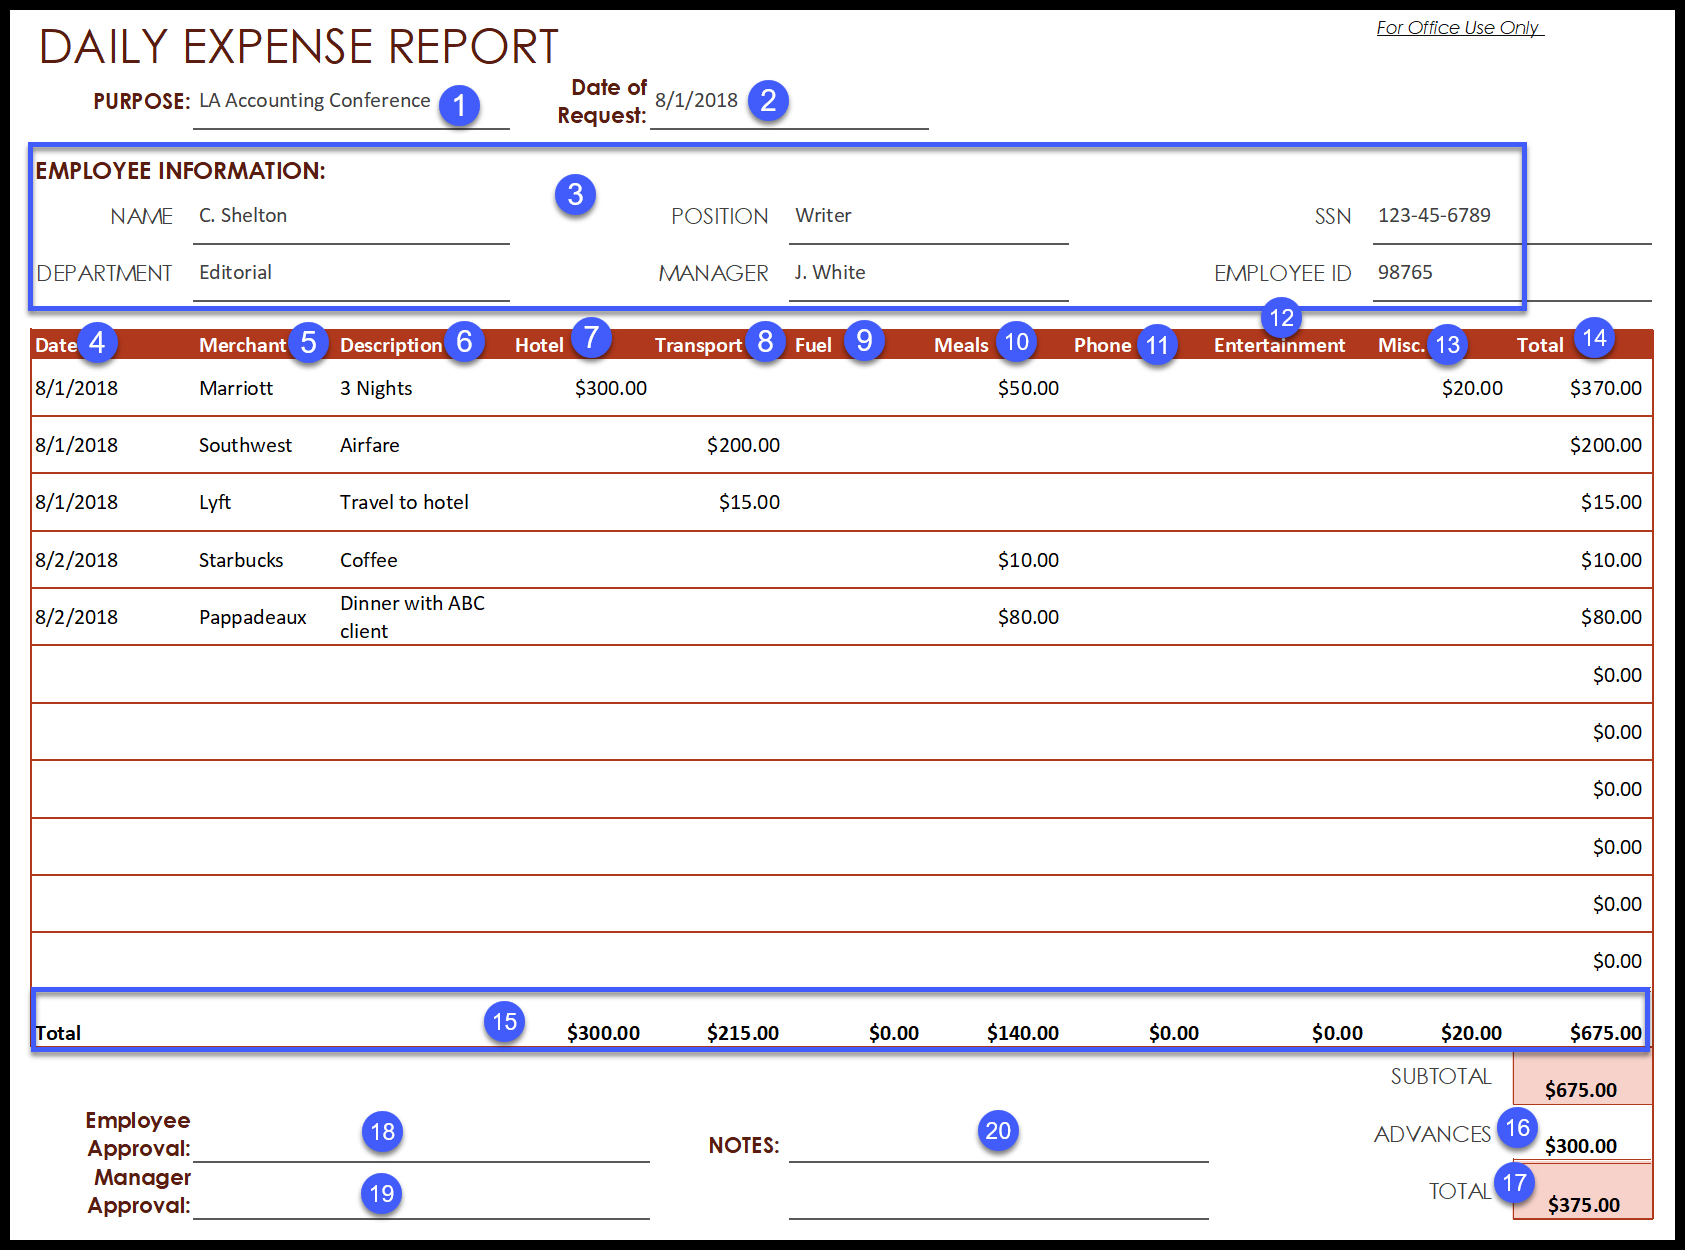 017 Template Ideas Employee Expense Report Word Image With Regard To Per Diem Expense Report Template